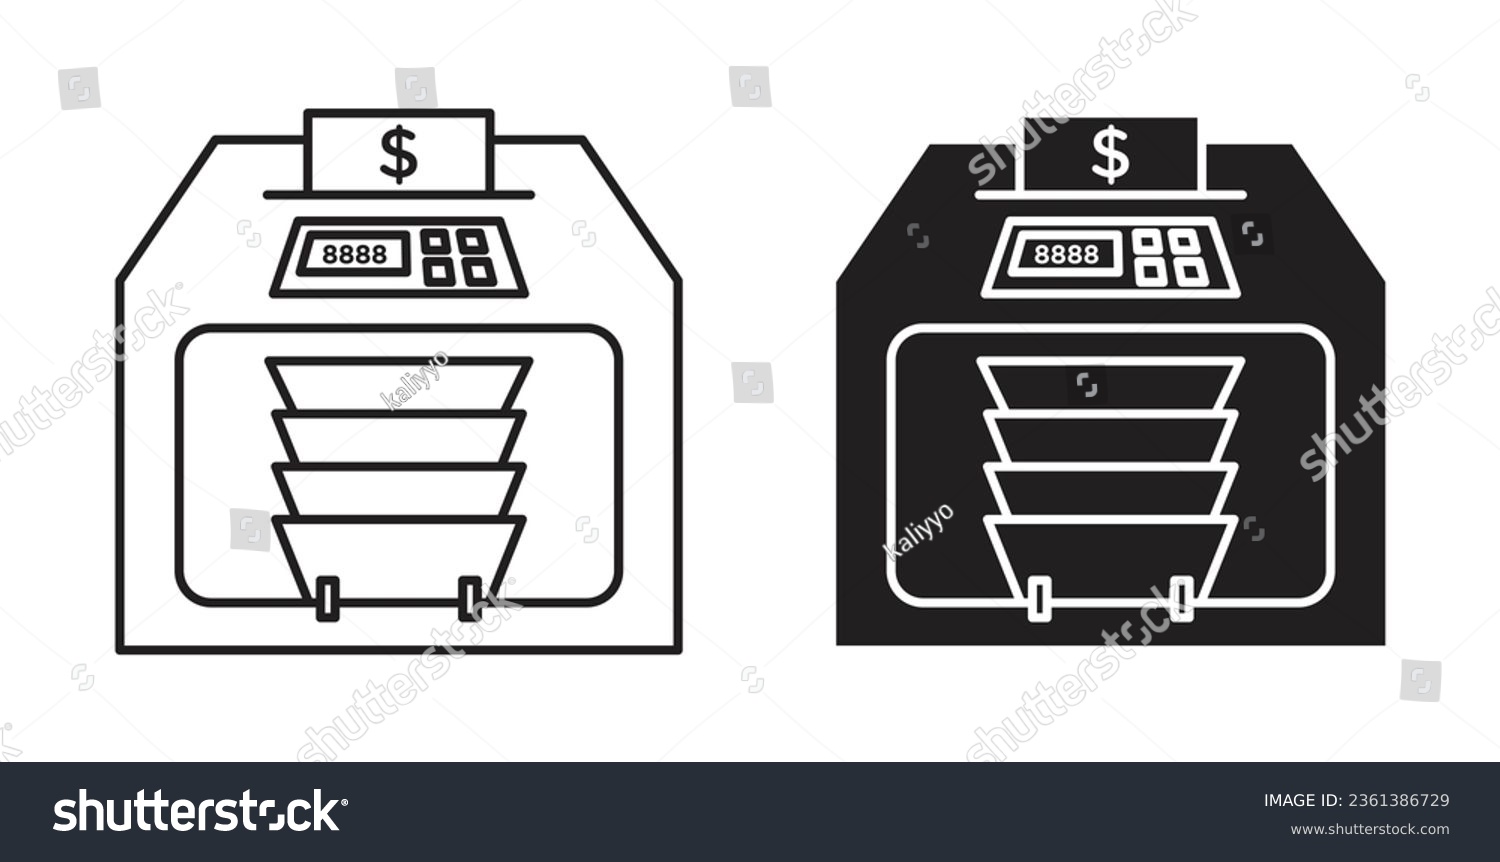 SVG of Money counting machine icon set. money counter vector symbol in black filled and outlined style. svg